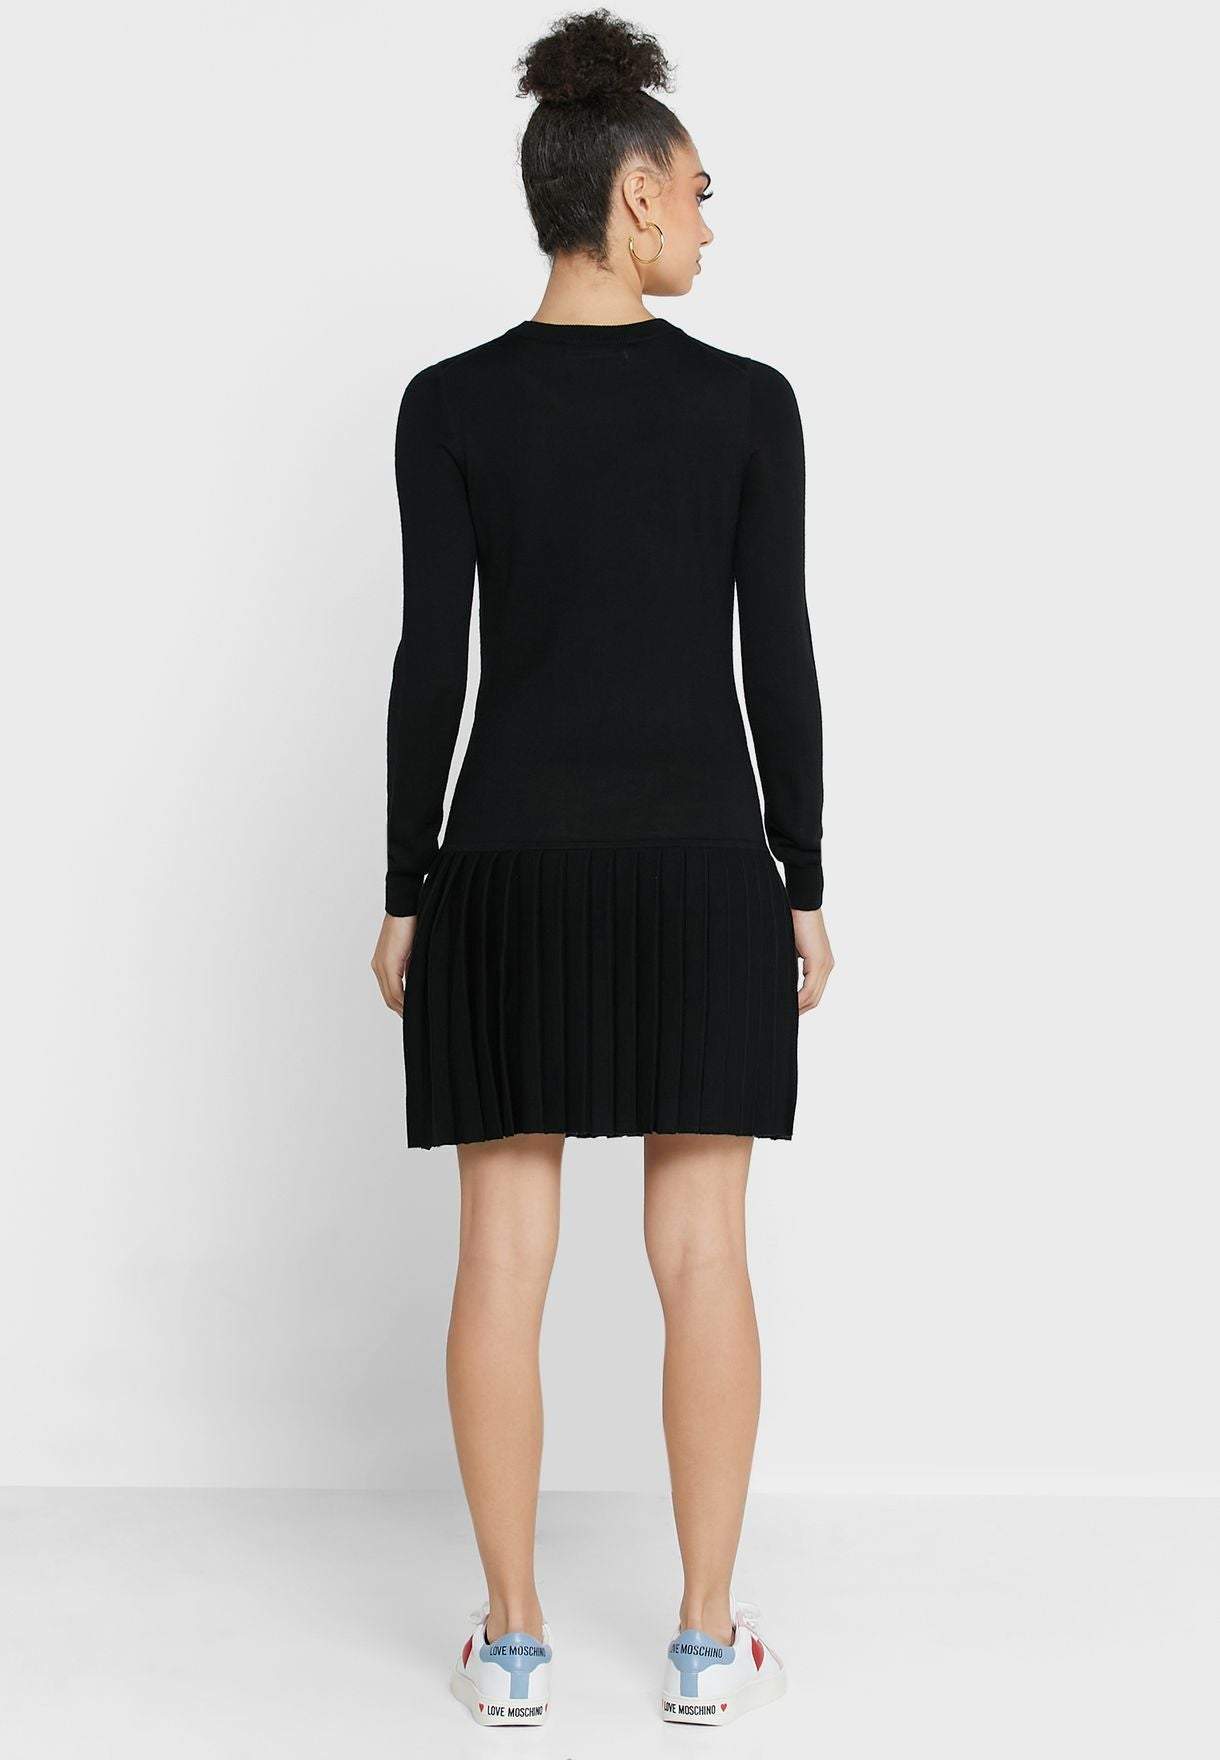 Love Moschino crewneck knit Dress Black, Dresses - Women - Clothing, feed-agegroup-adult, feed-color-Black, feed-gender-female, IT40|S, IT42|M, IT44|L, IT46 | L, Love Moschino at SEYMAYKA